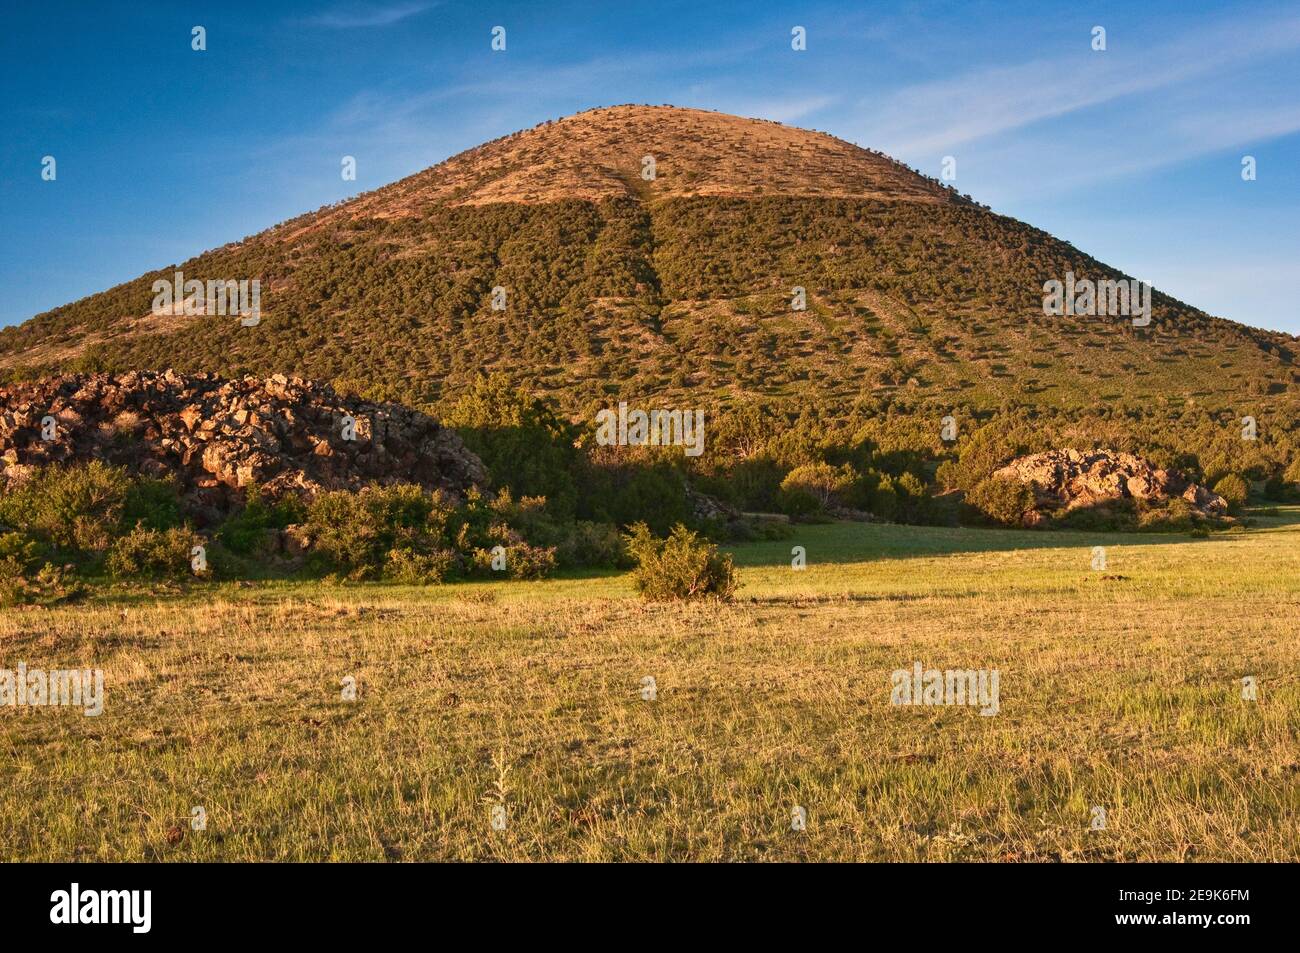 Volcanic rocks at the end of ancient lava flow, crater, Capulin Volcano National Monument, New Mexico, USA Stock Photo